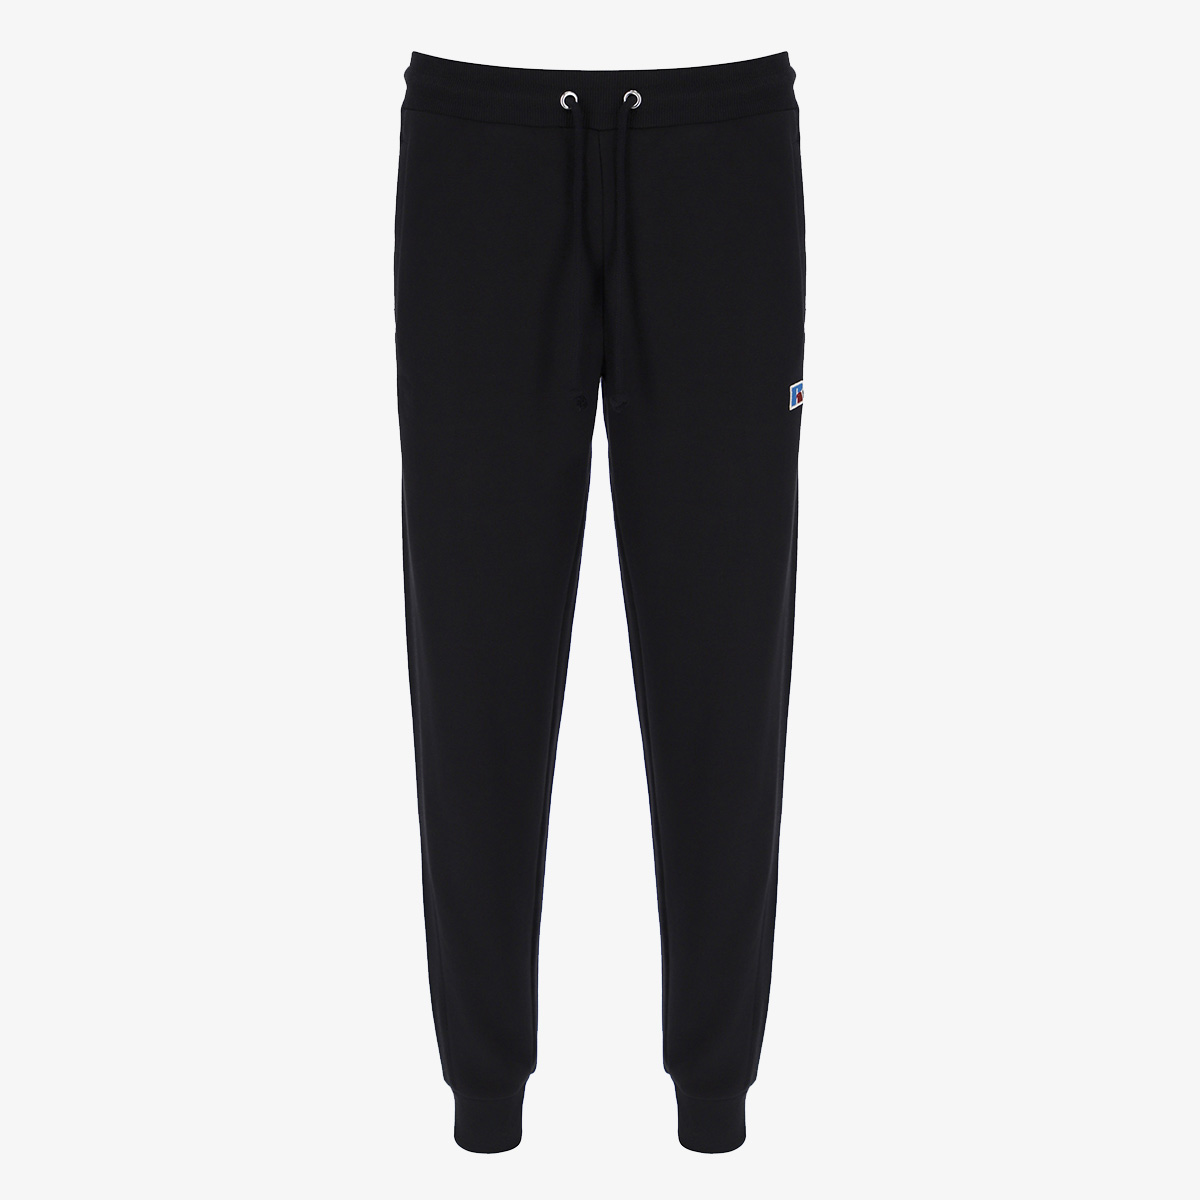 Russell Athletic Donji deo trenerke ERNEST - CUFF JOGGER 